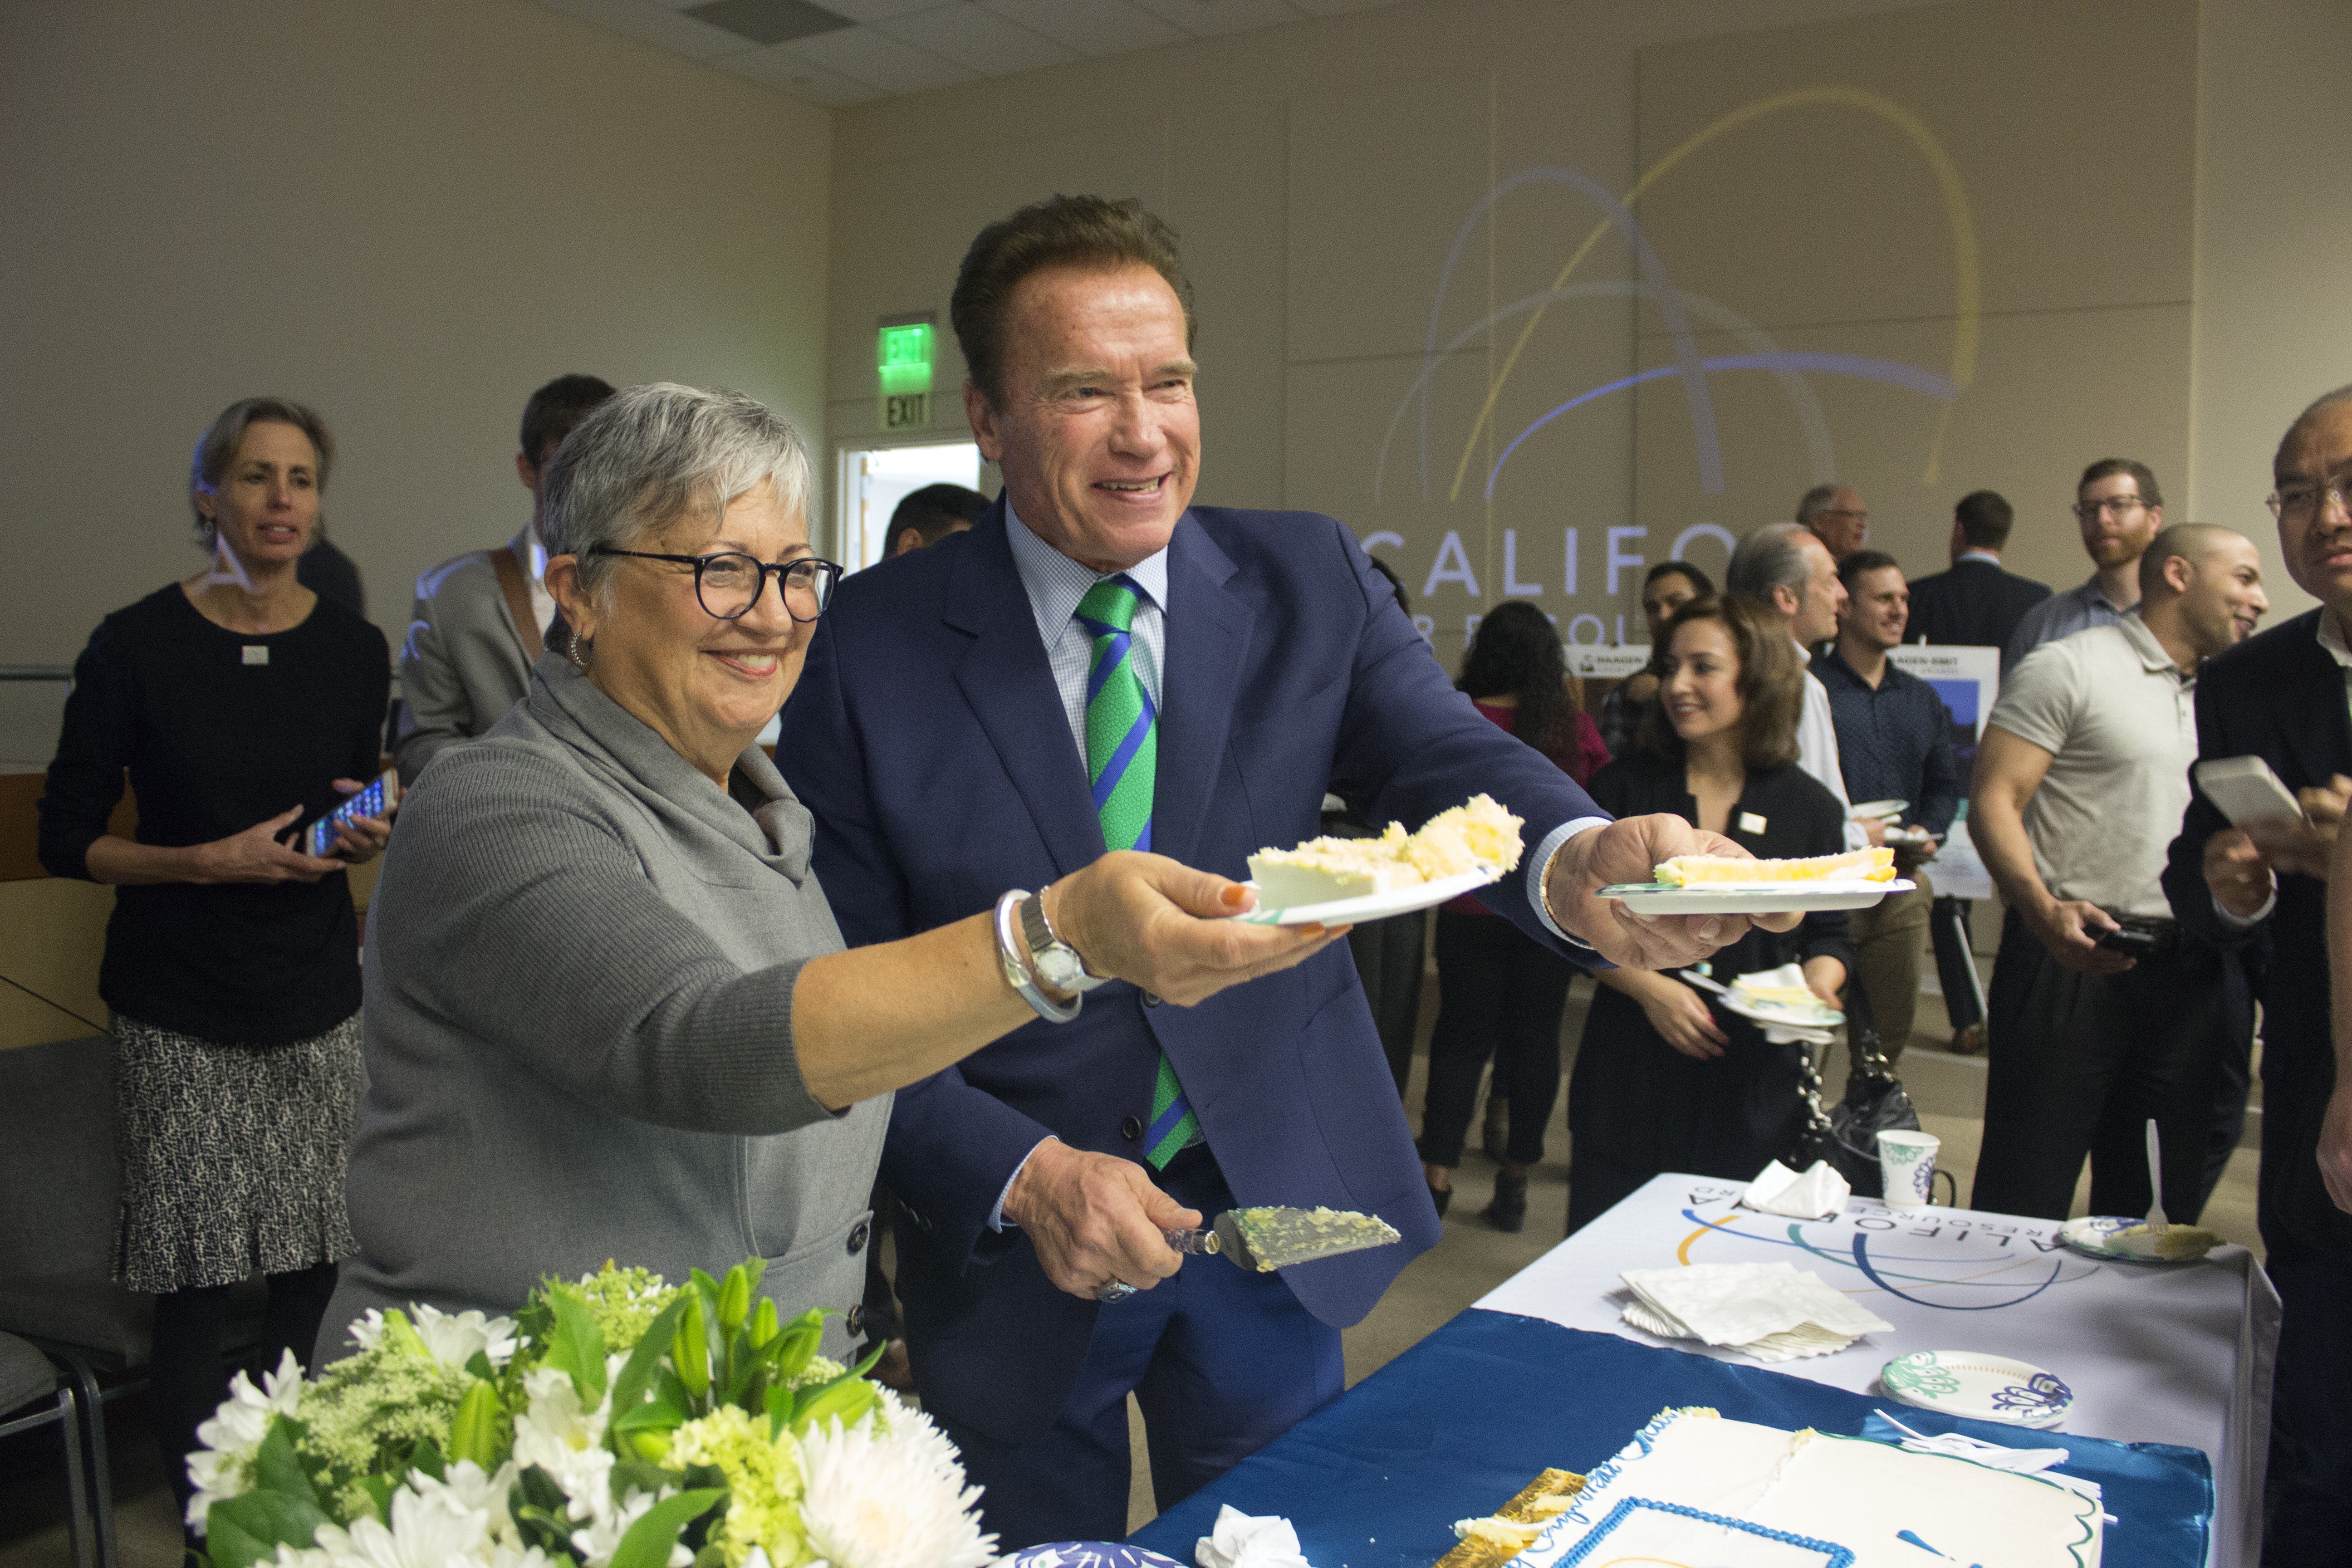 Chair Nichols & former Governor Schwarzenegger hand out cake for 50th Anniversary Celebration